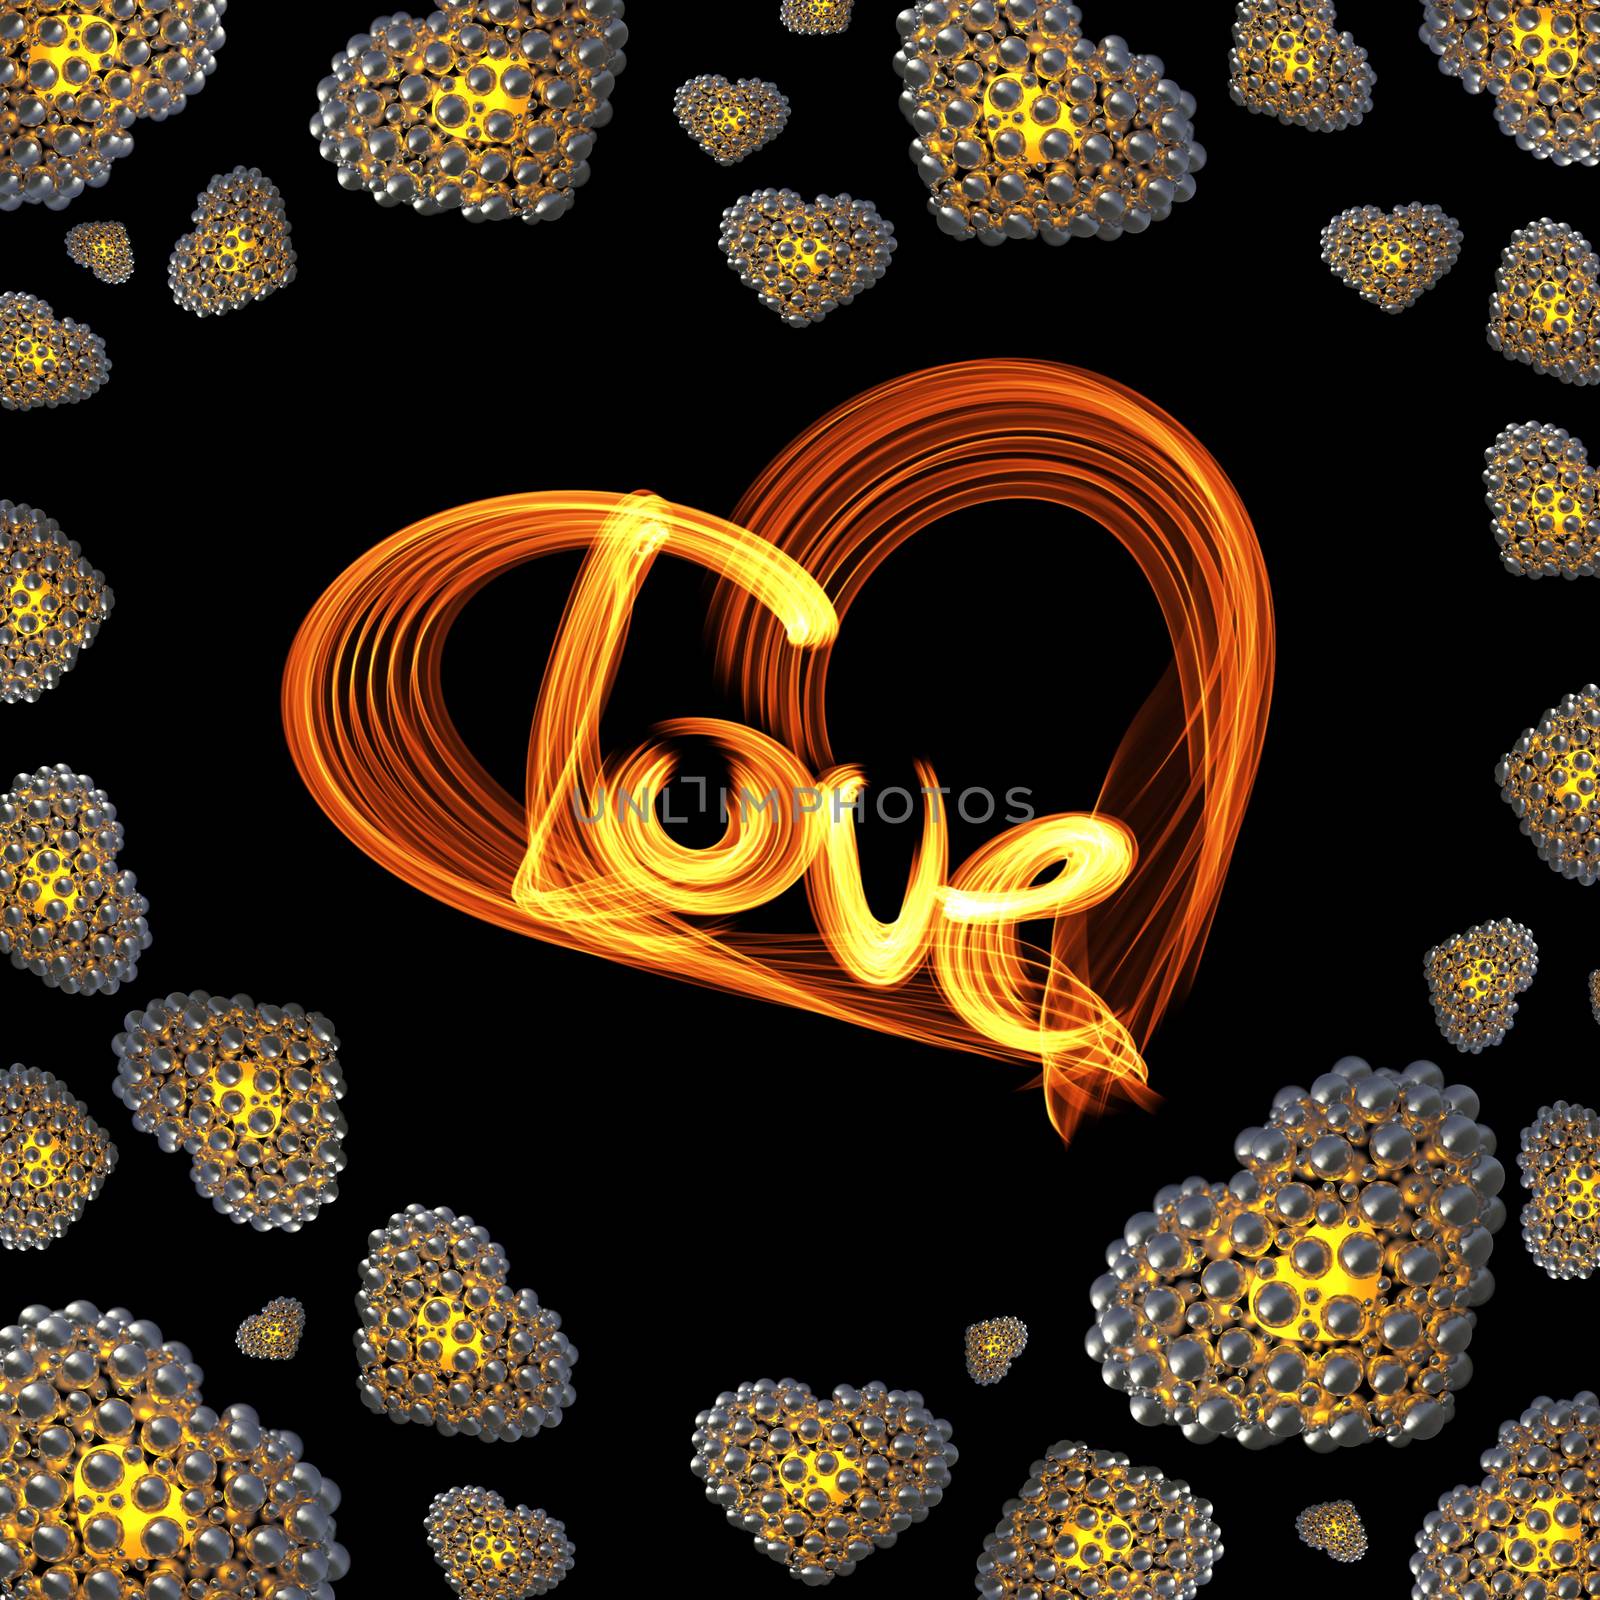 metal Gold hearts made of spheres isolated on black background with Love lettering written by fire or smoke. Happy valentines day 3d illustration by skrotov